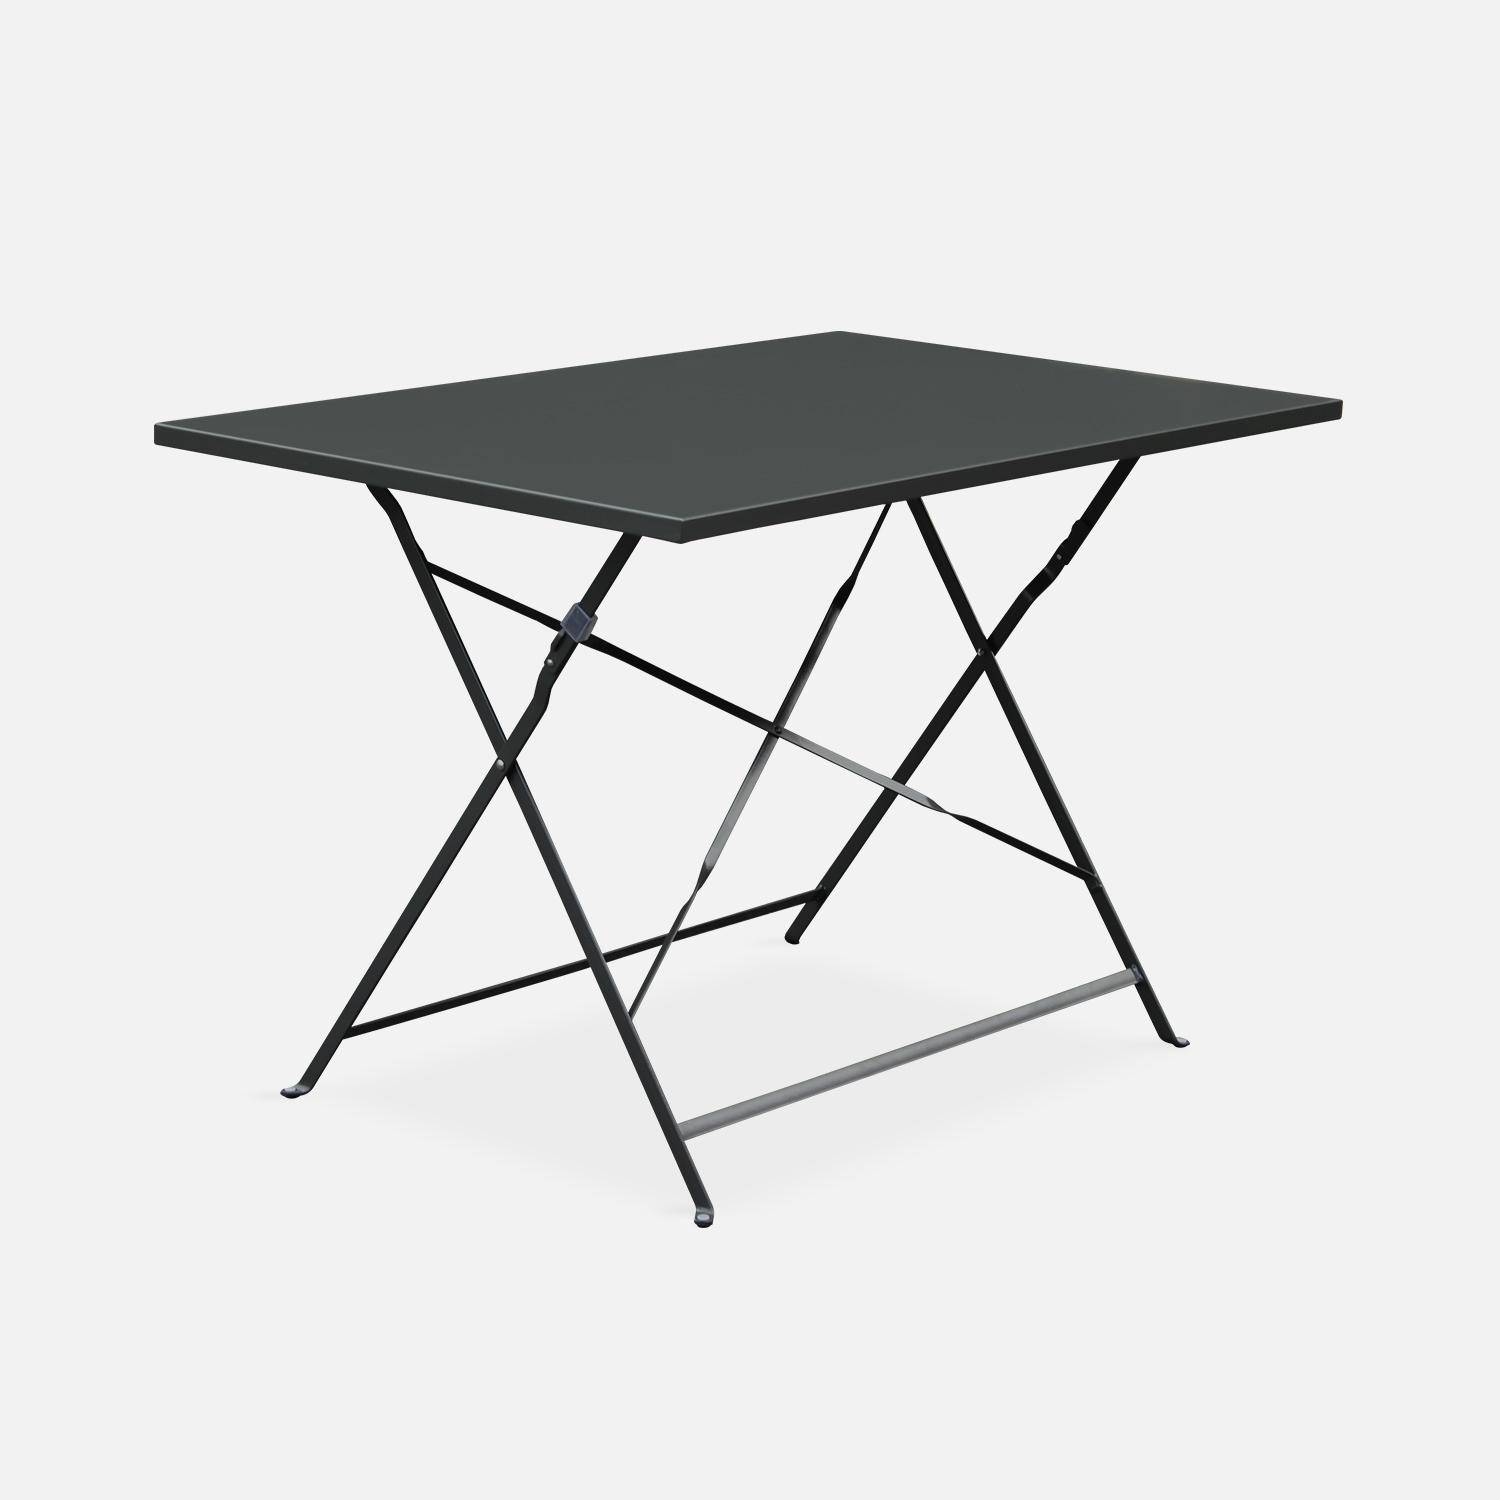 4-seater foldable thermo-lacquered steel bistro garden table with chairs, Emilia set 110cm, Anthracite Photo4